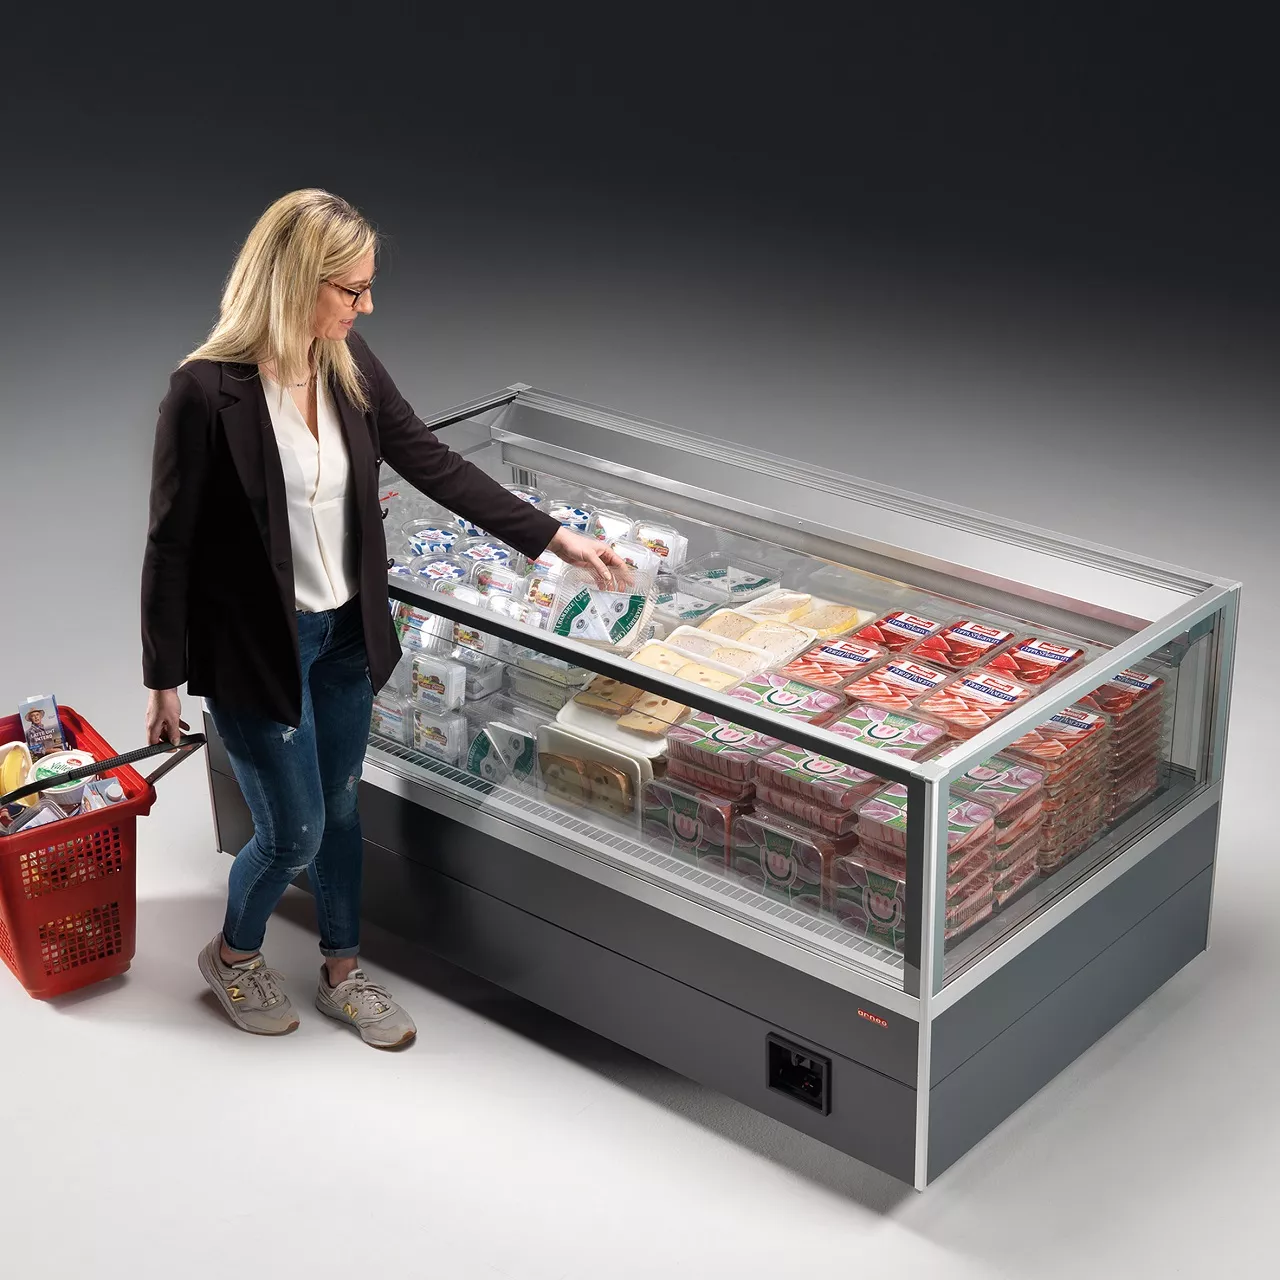 Arneg presented new promotional refrigerated islands